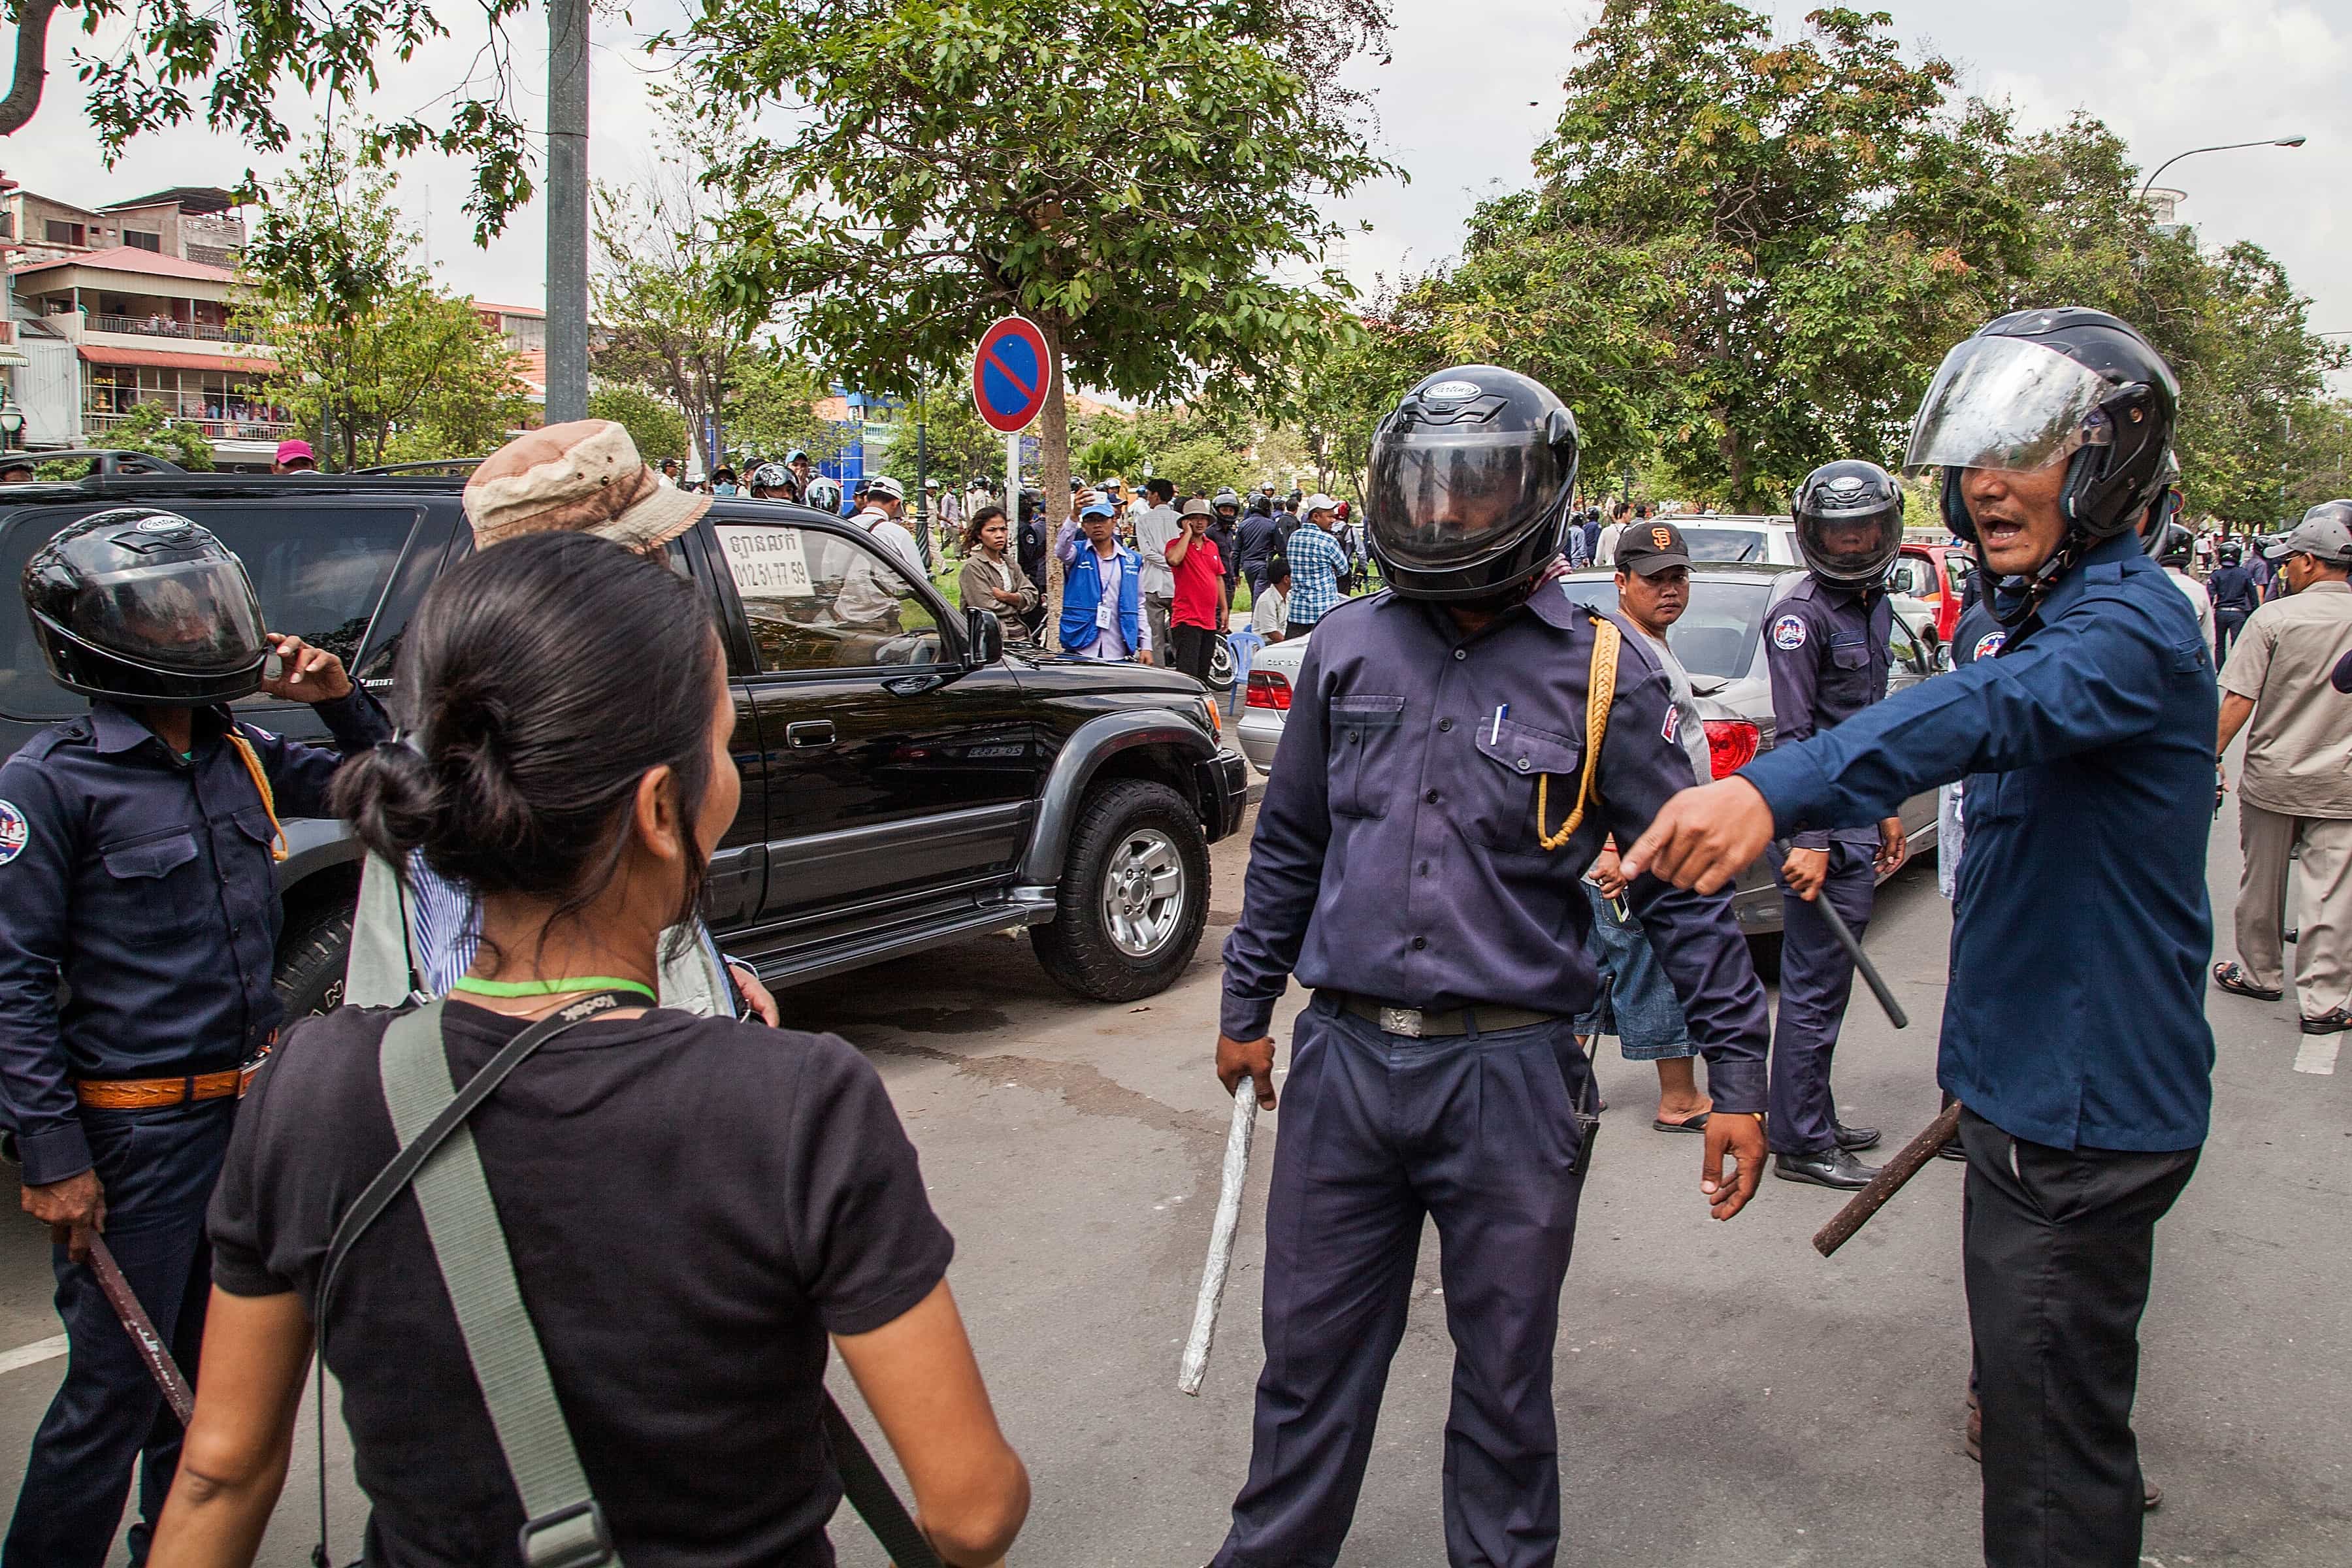 PHNOM PENH, CAMBODIA - MAY 01: Municipal security guards gestures towards a journalist during the Labor Day demonstration near Freedom Park on May 1, 2014 in Phnom Penh., Photo by Omar Havana/Getty Images